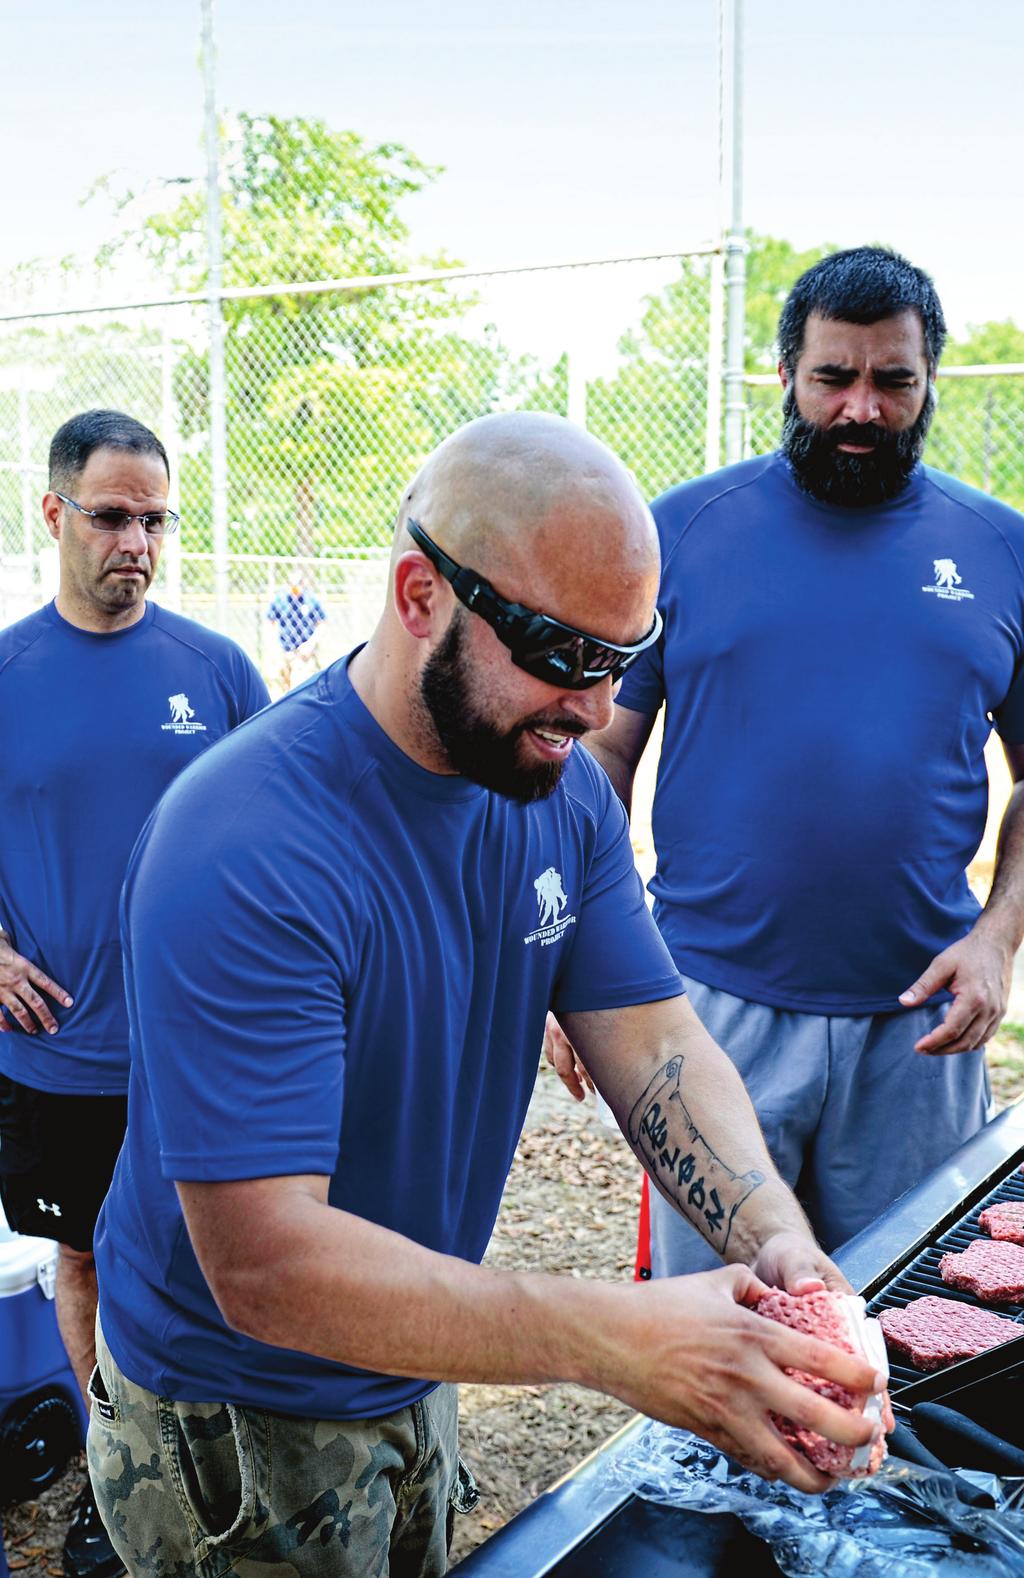 We all share a common ground, and we can use it as a starting point to better our lives. WOUNDED WARRIOR CARLOS DE LEÓN (CENTER) WWP CONNECTS WARRIORS with people who understand their needs.